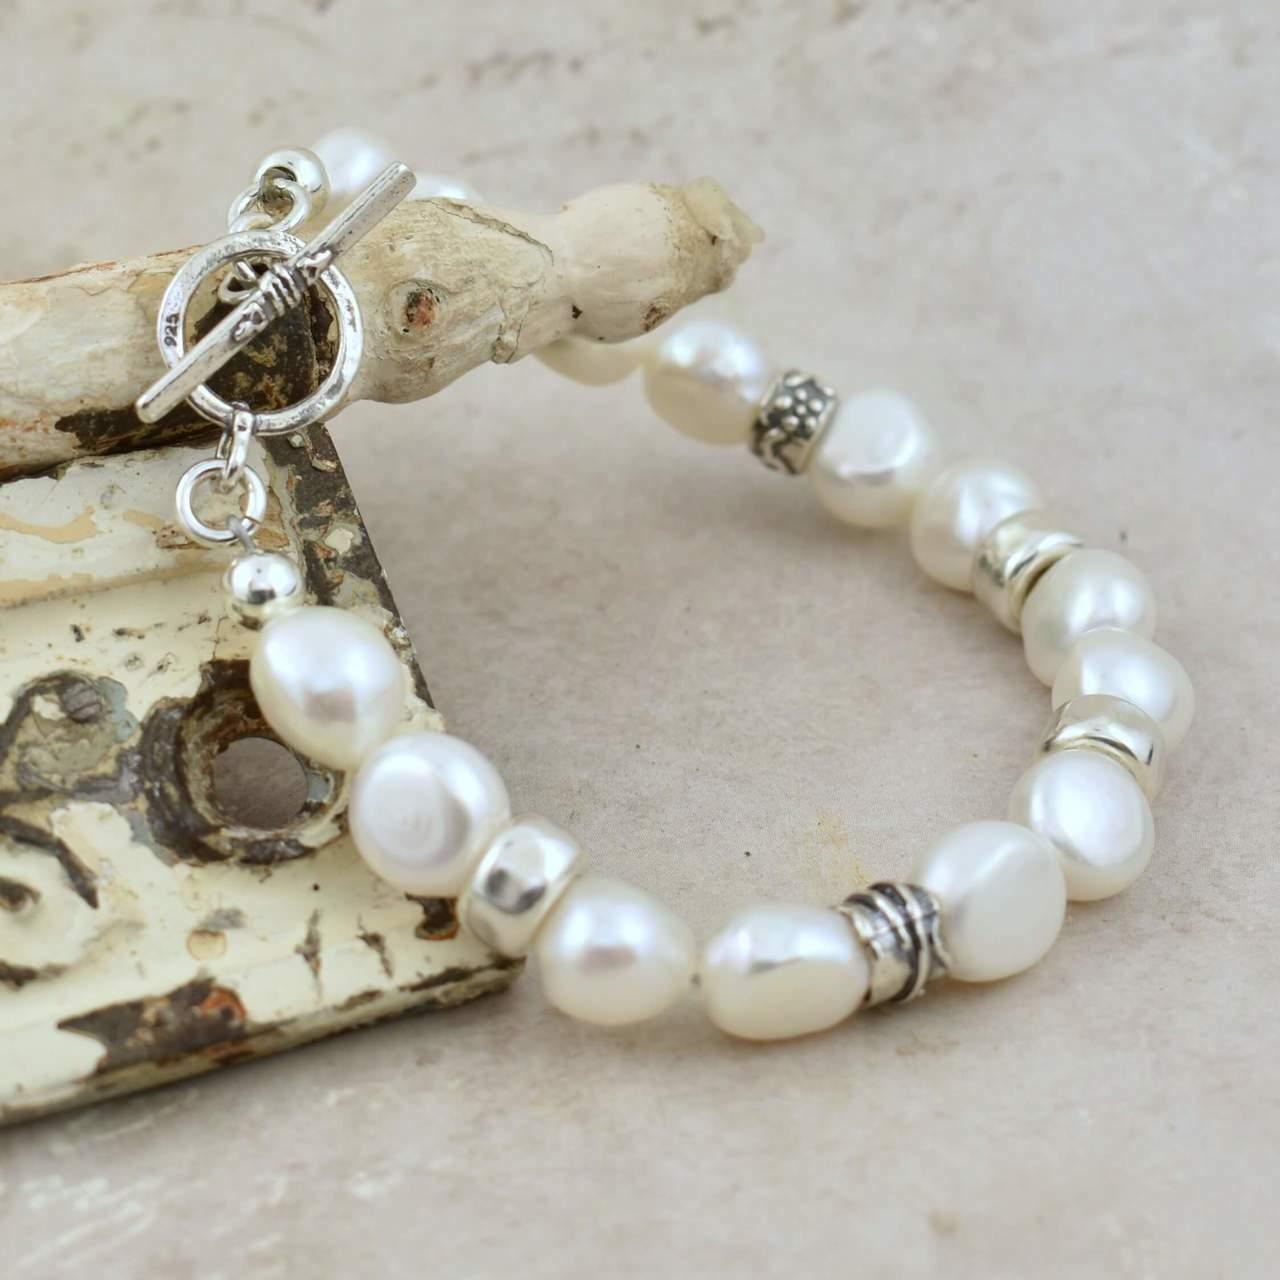 Pearl Bracelet with sterling silver accents and a toggle clasp